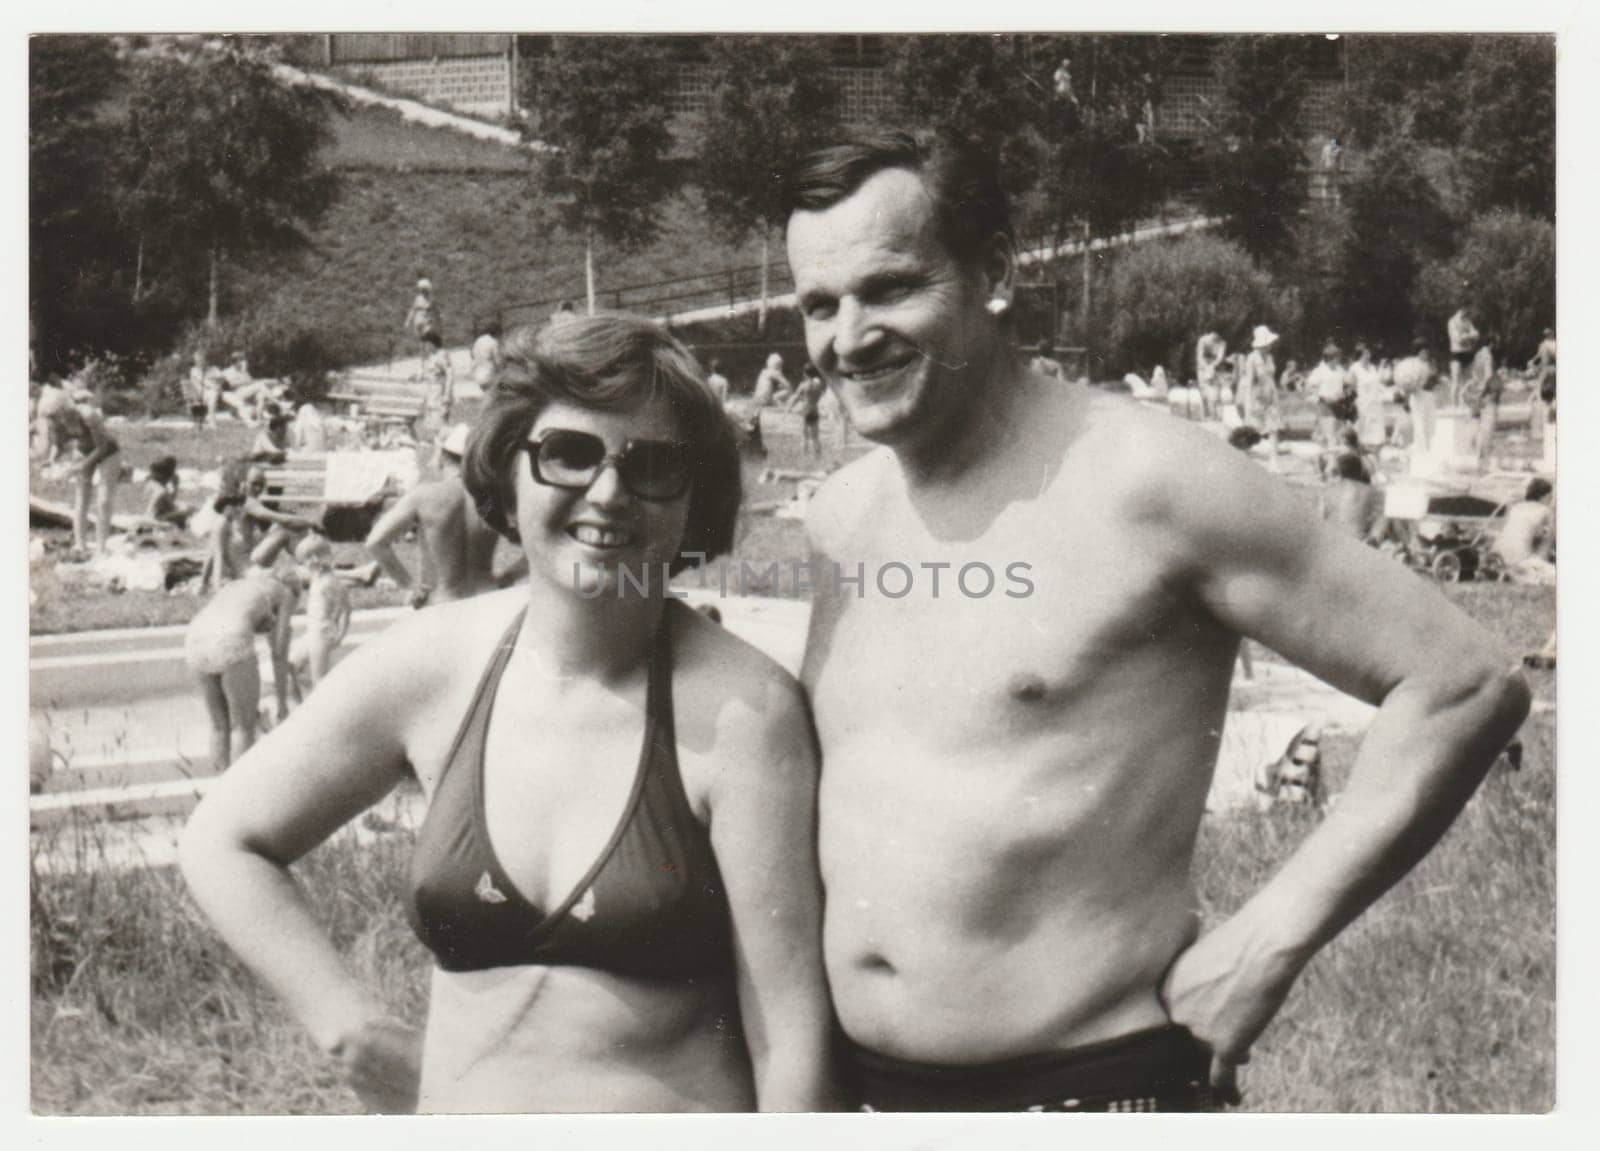 Vintage photo shows a mature couple at outdoor swimming pool. Holidays - vacation theme. Retro black and white photography. Circa 1980. by roman_nerud